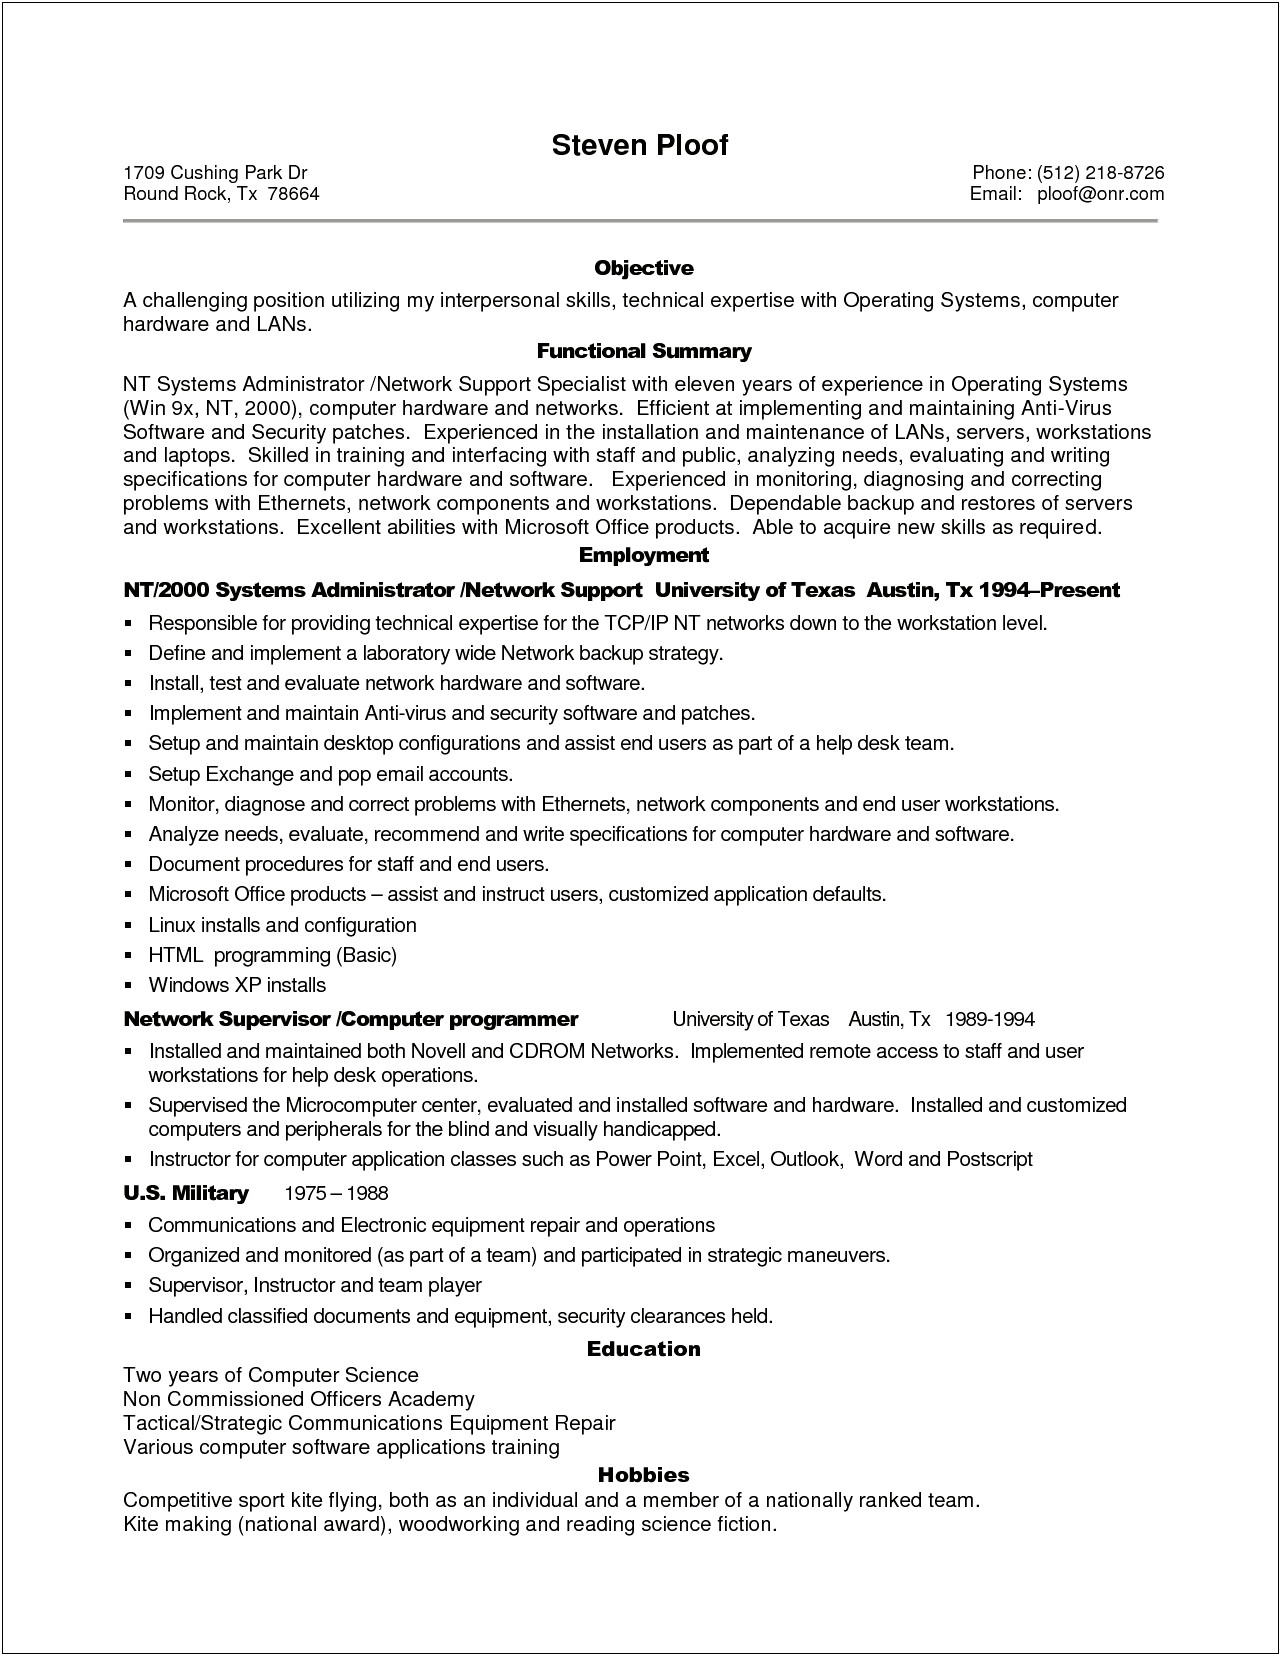 Resume Format For A Lot Of Experience